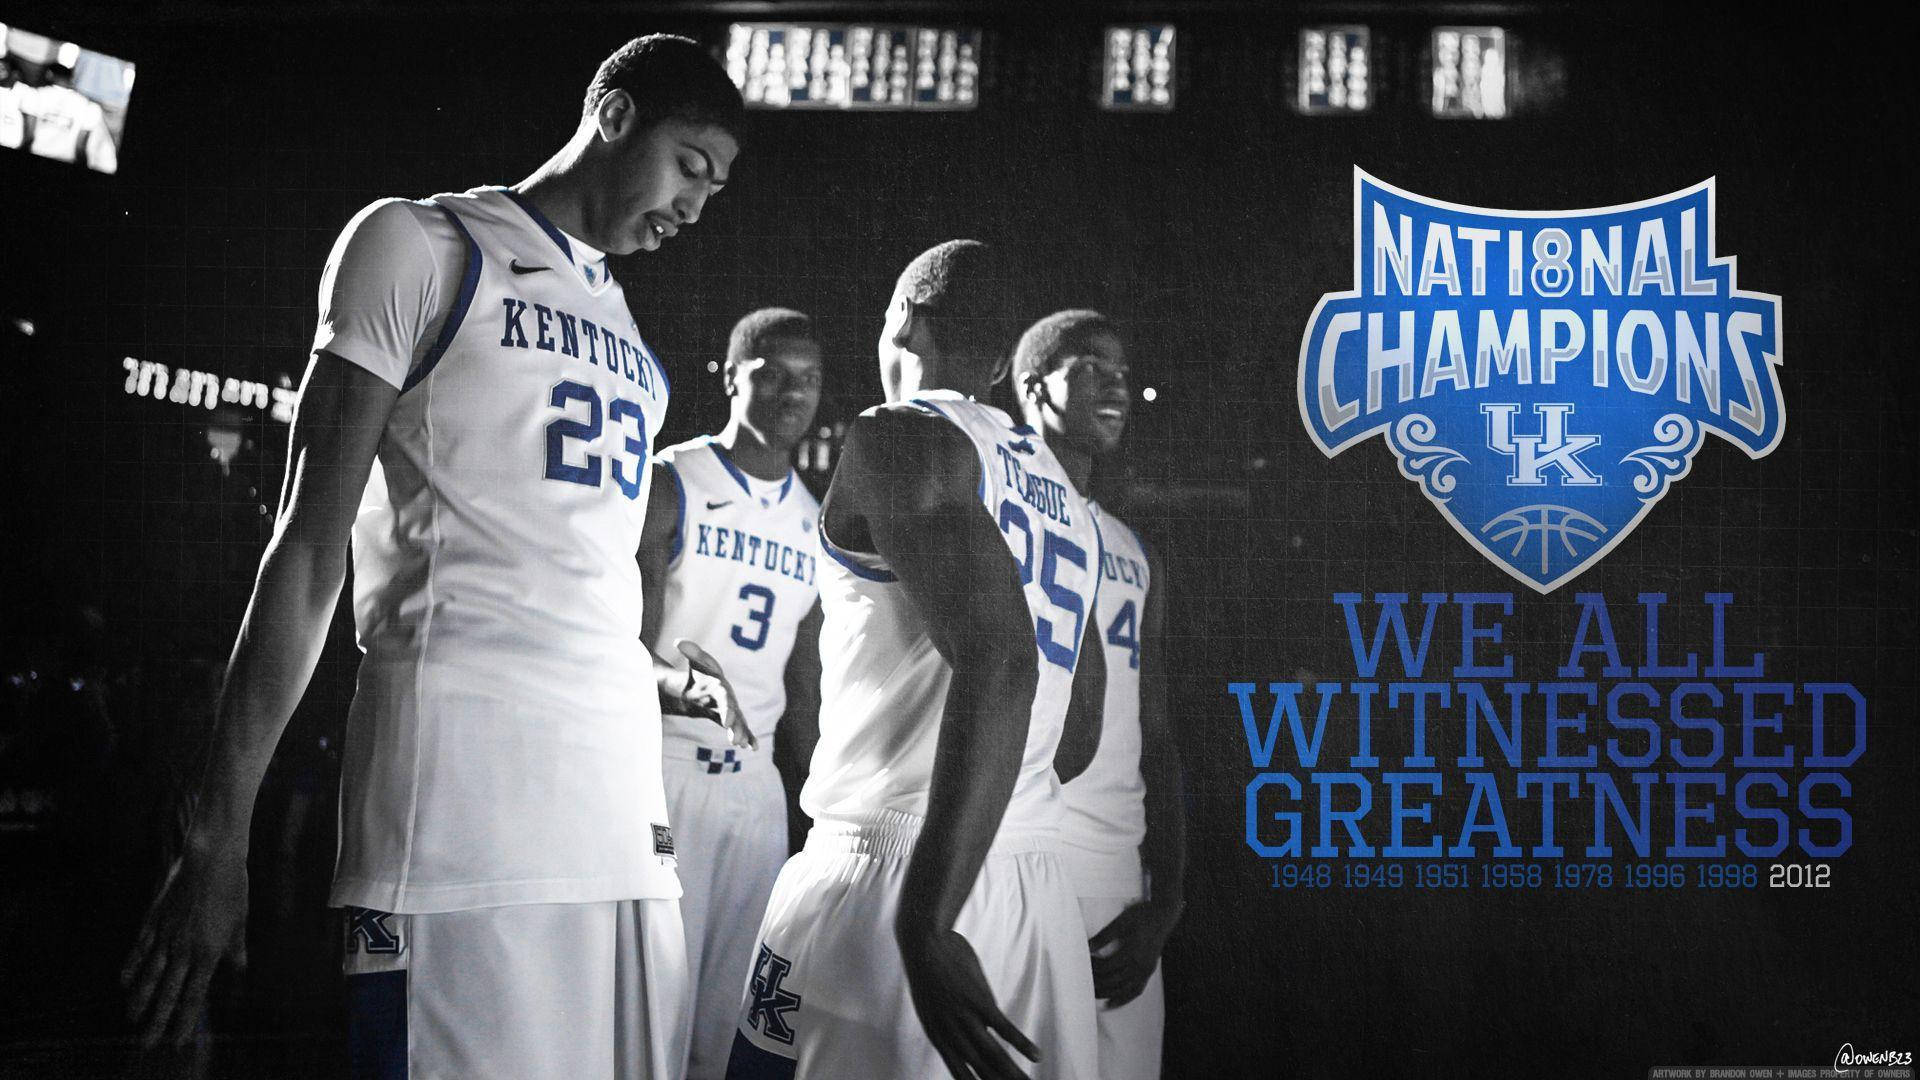 University Of Kentucky - Home Of Champions Background